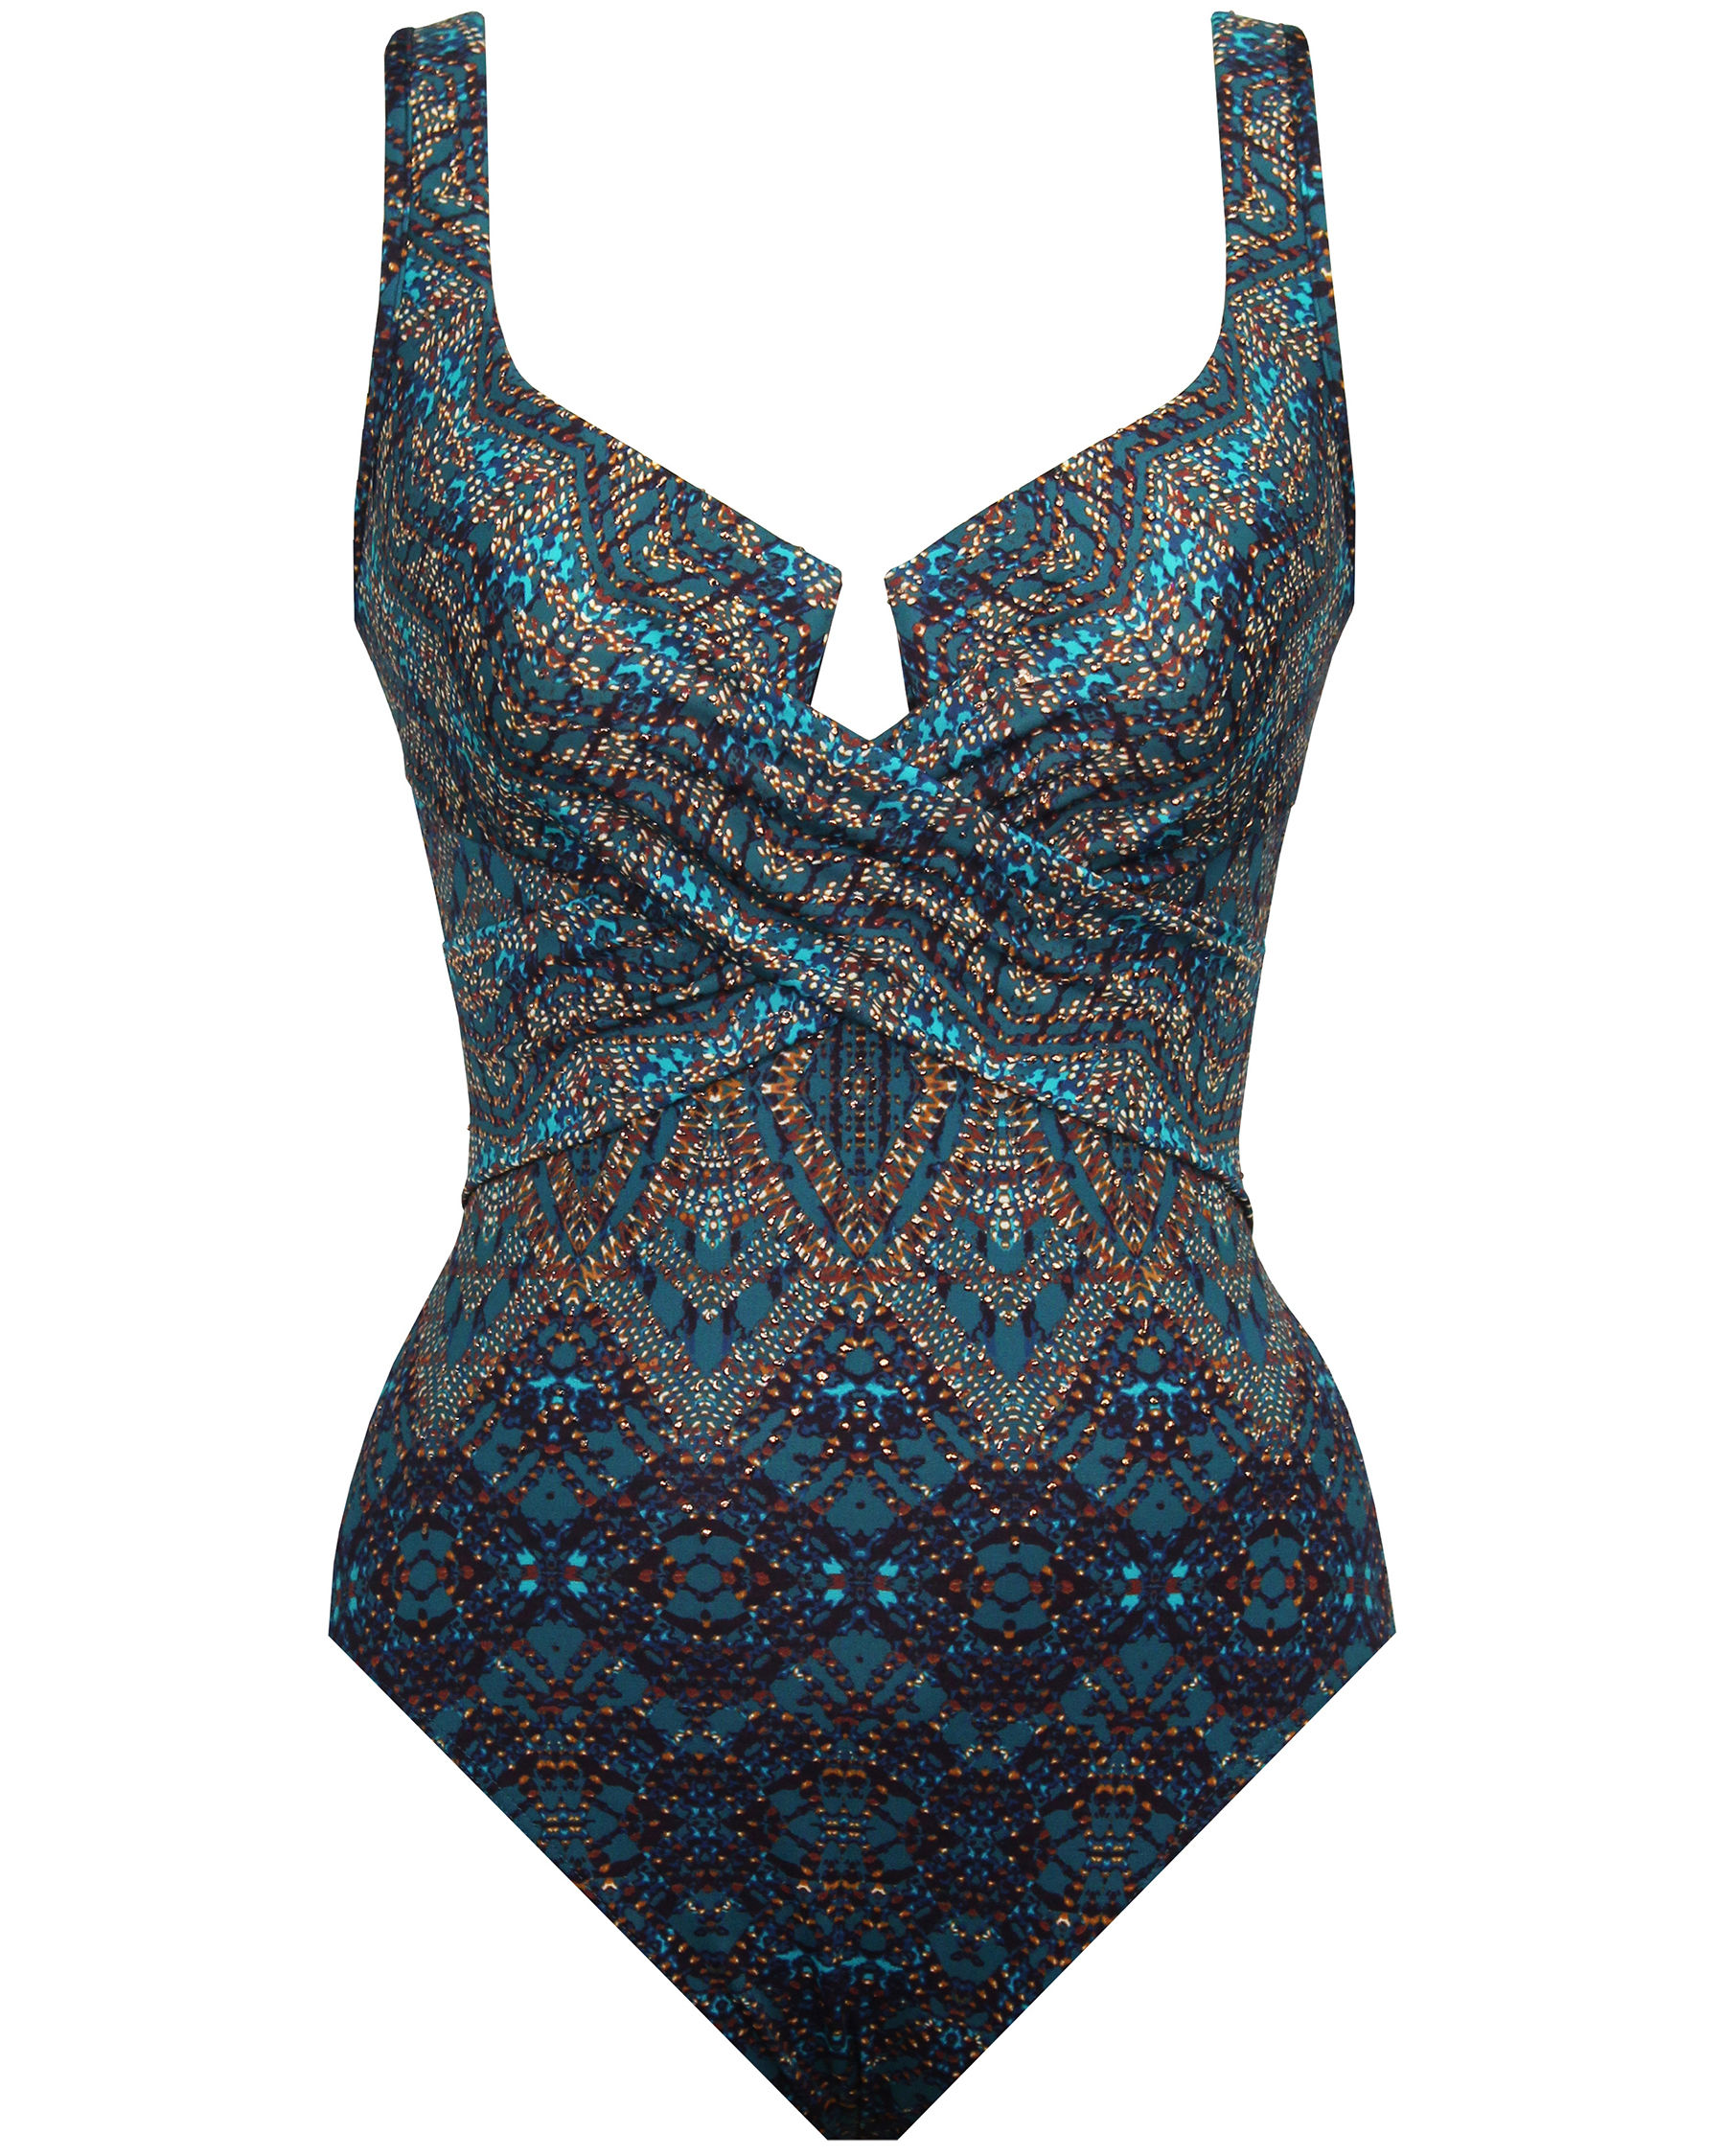 MIRACLESUIT One-piece Swimsuit Print 6529876 - View1